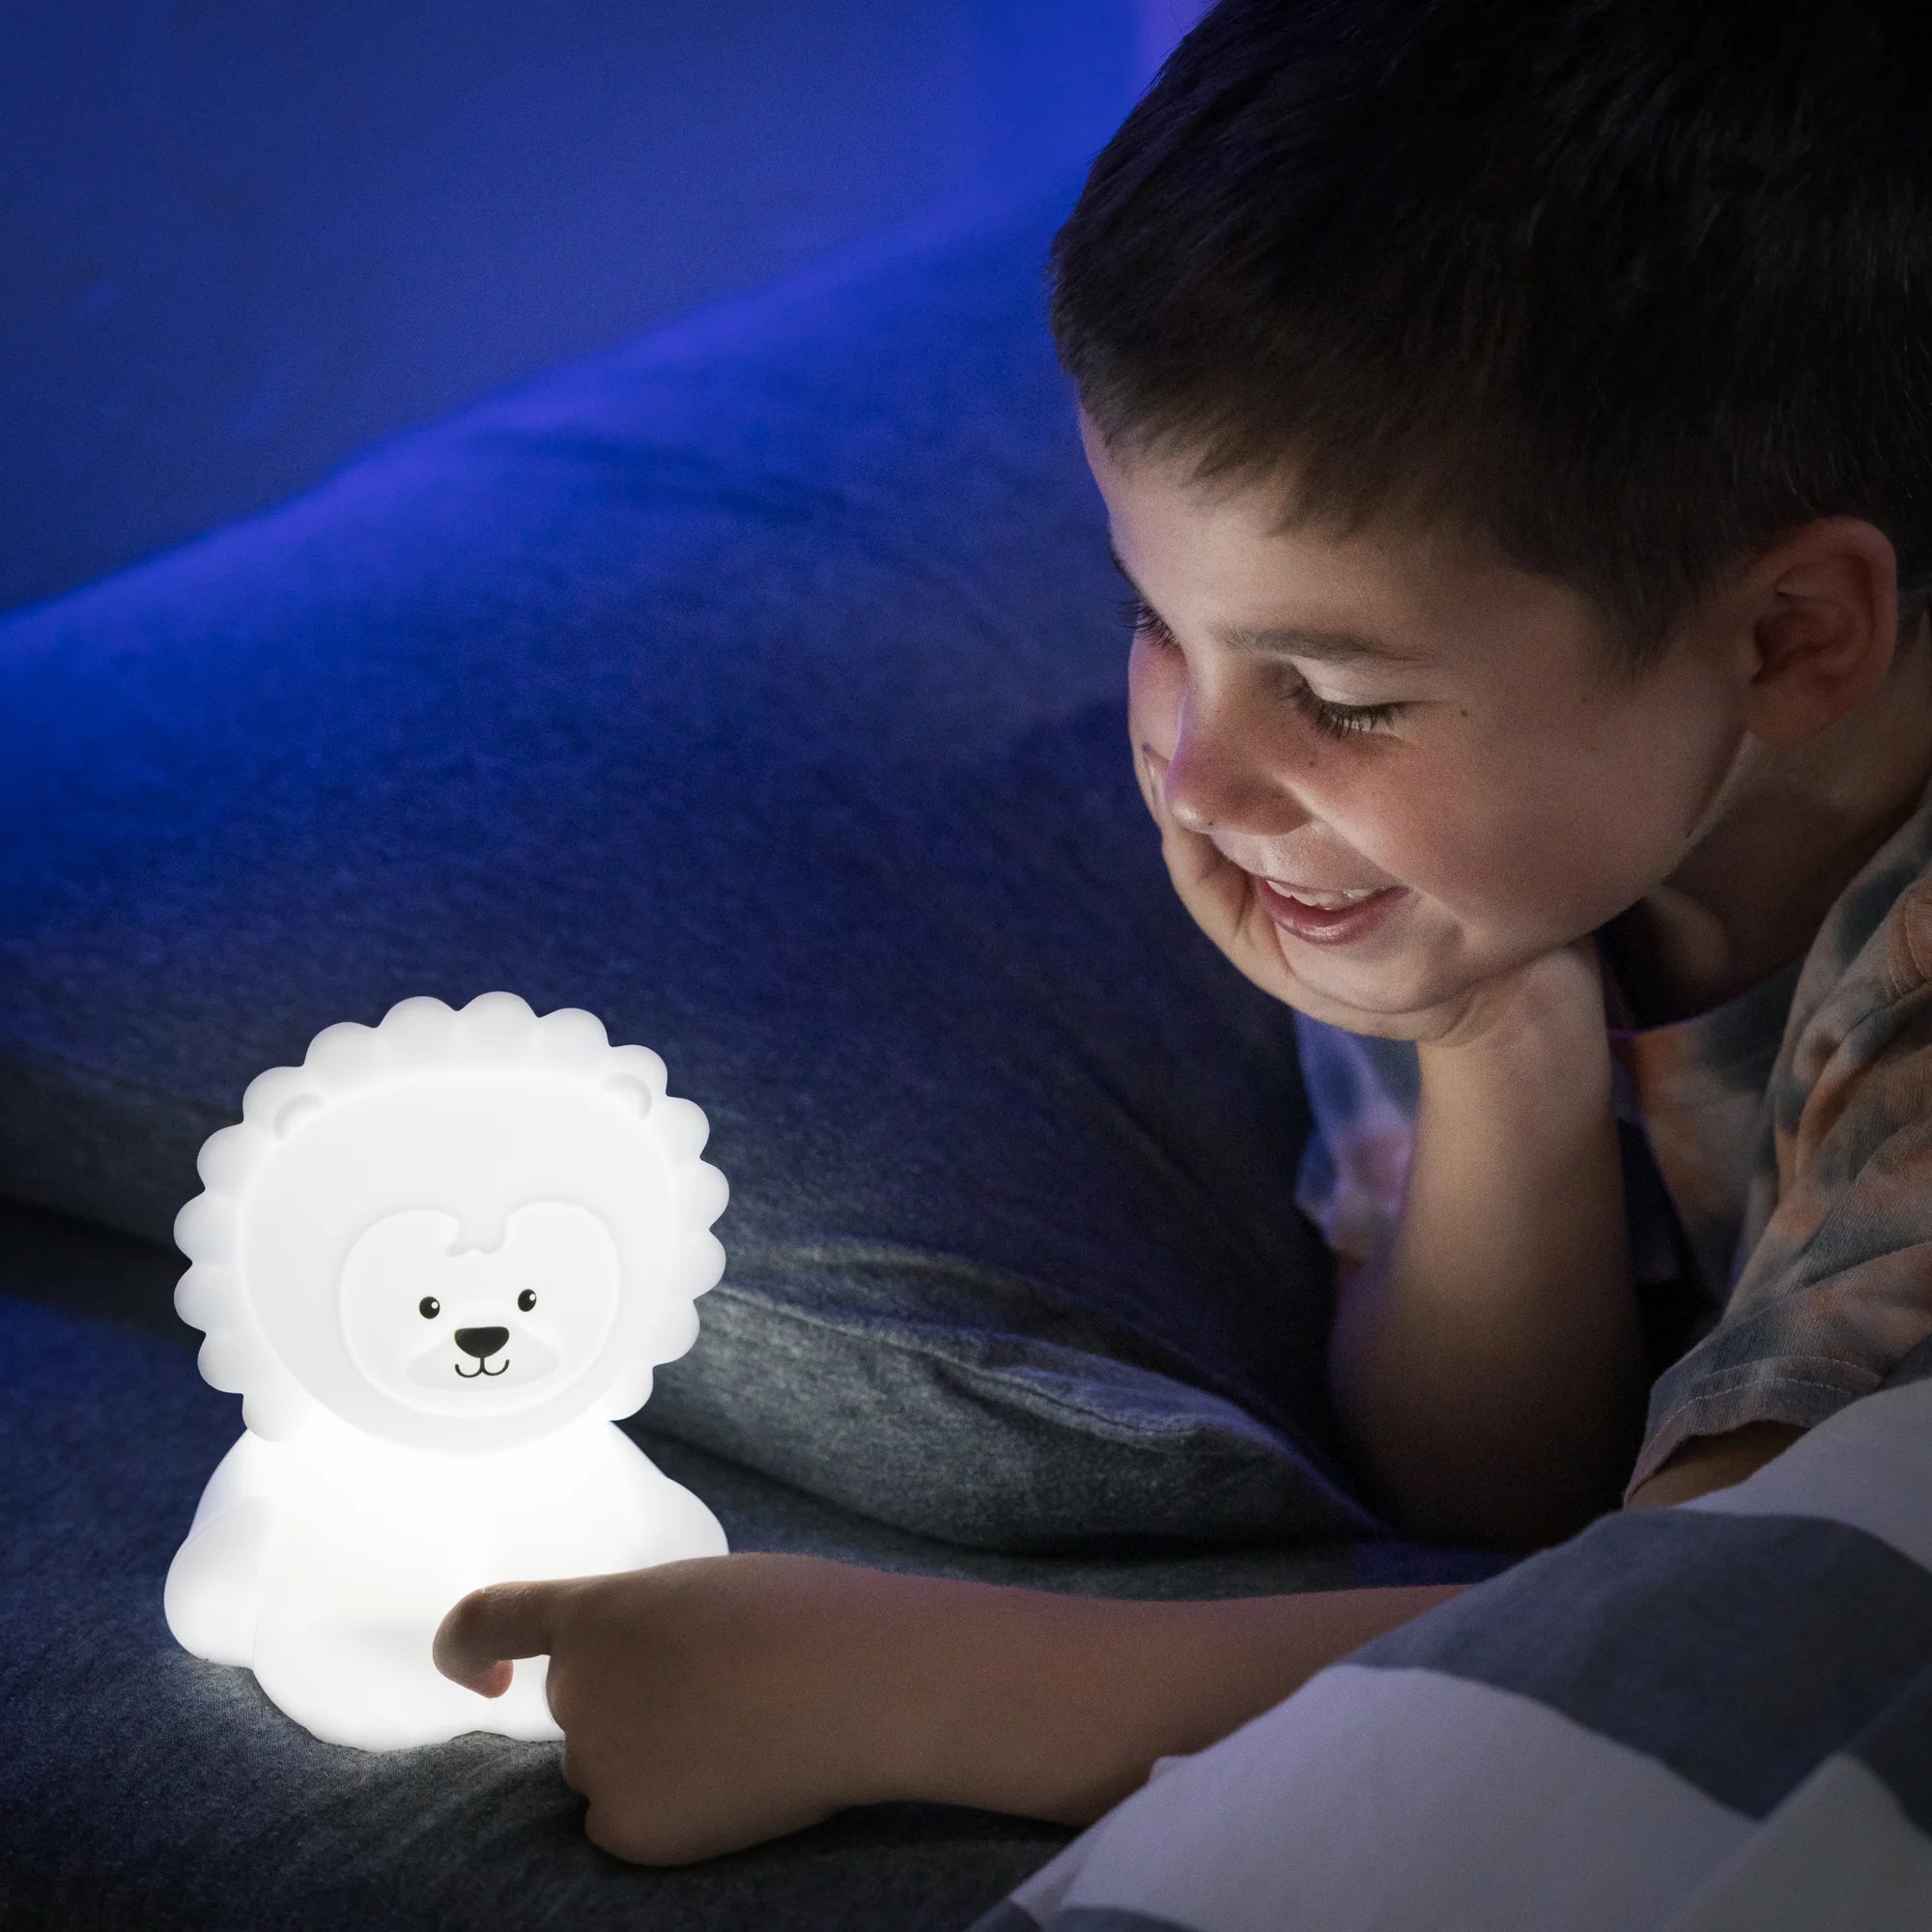 Lumieworld Silicone Tap Sensor LED Lion Night Light with Remote - ANB Baby -860008060174$20 - $50